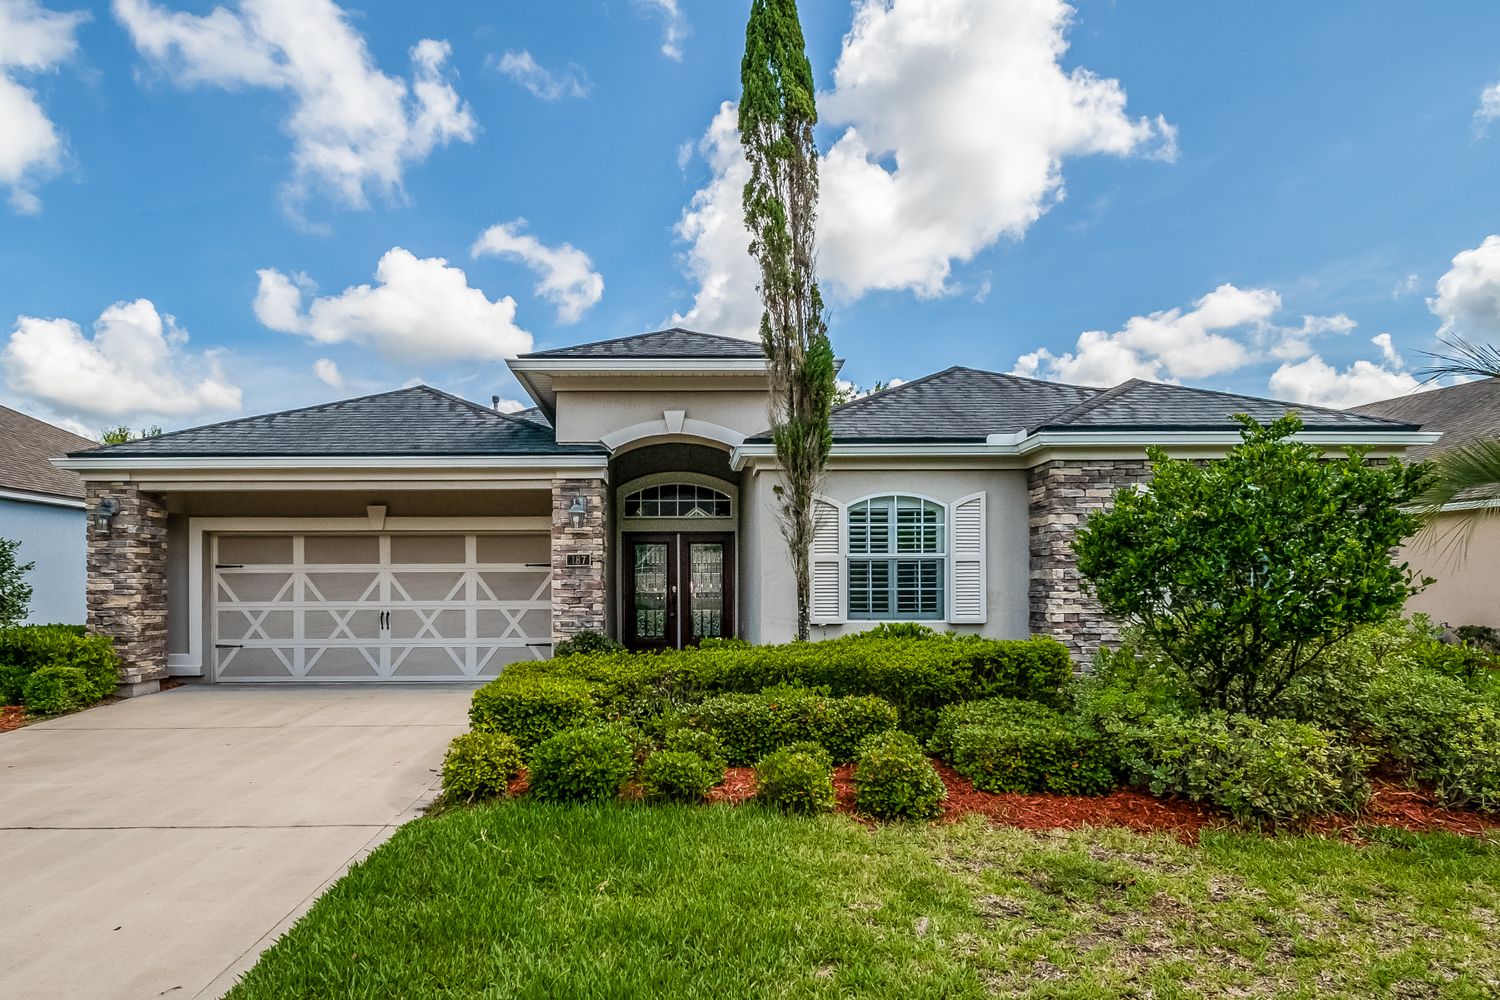 Beautiful home with two-car garage at Invitation Homes Jacksonville.